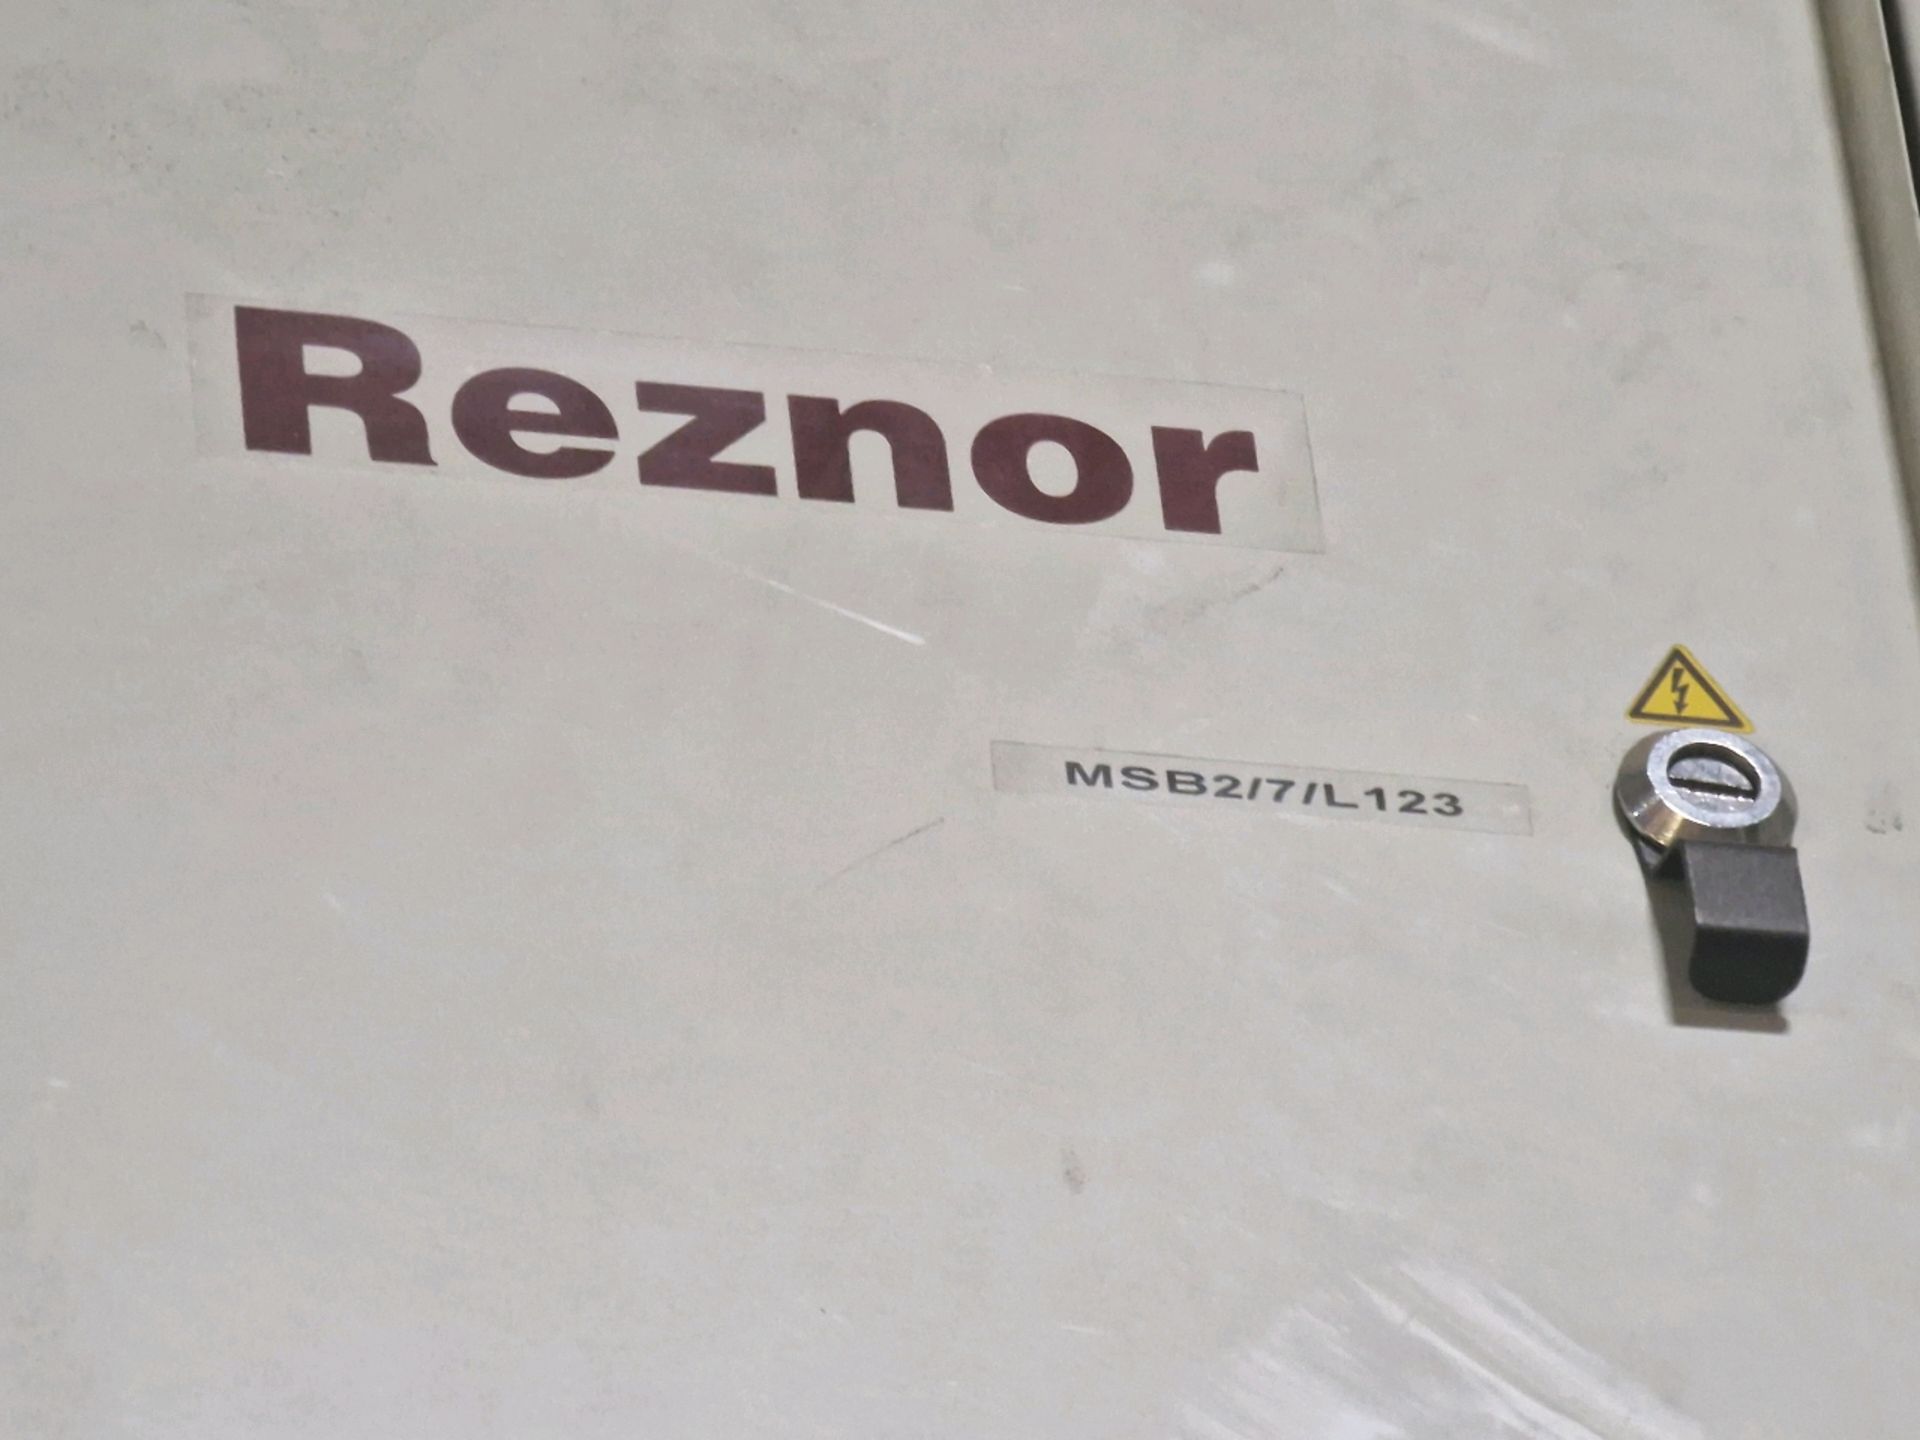 Renzor Industrial Heating Units - Image 6 of 6